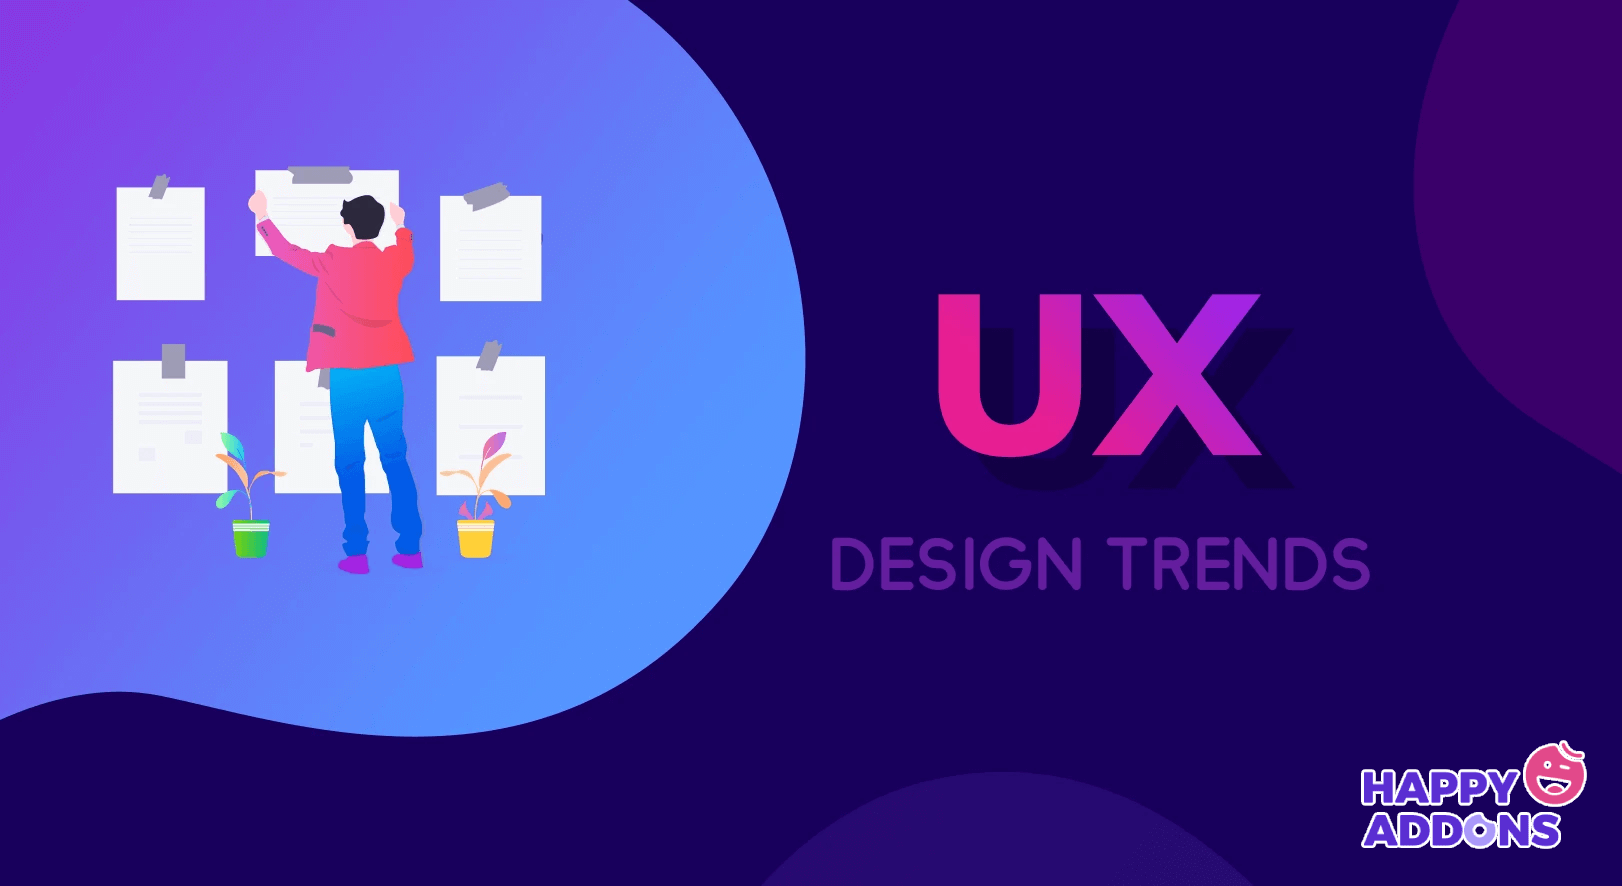 Improve the UI and UX of a website following the current trends